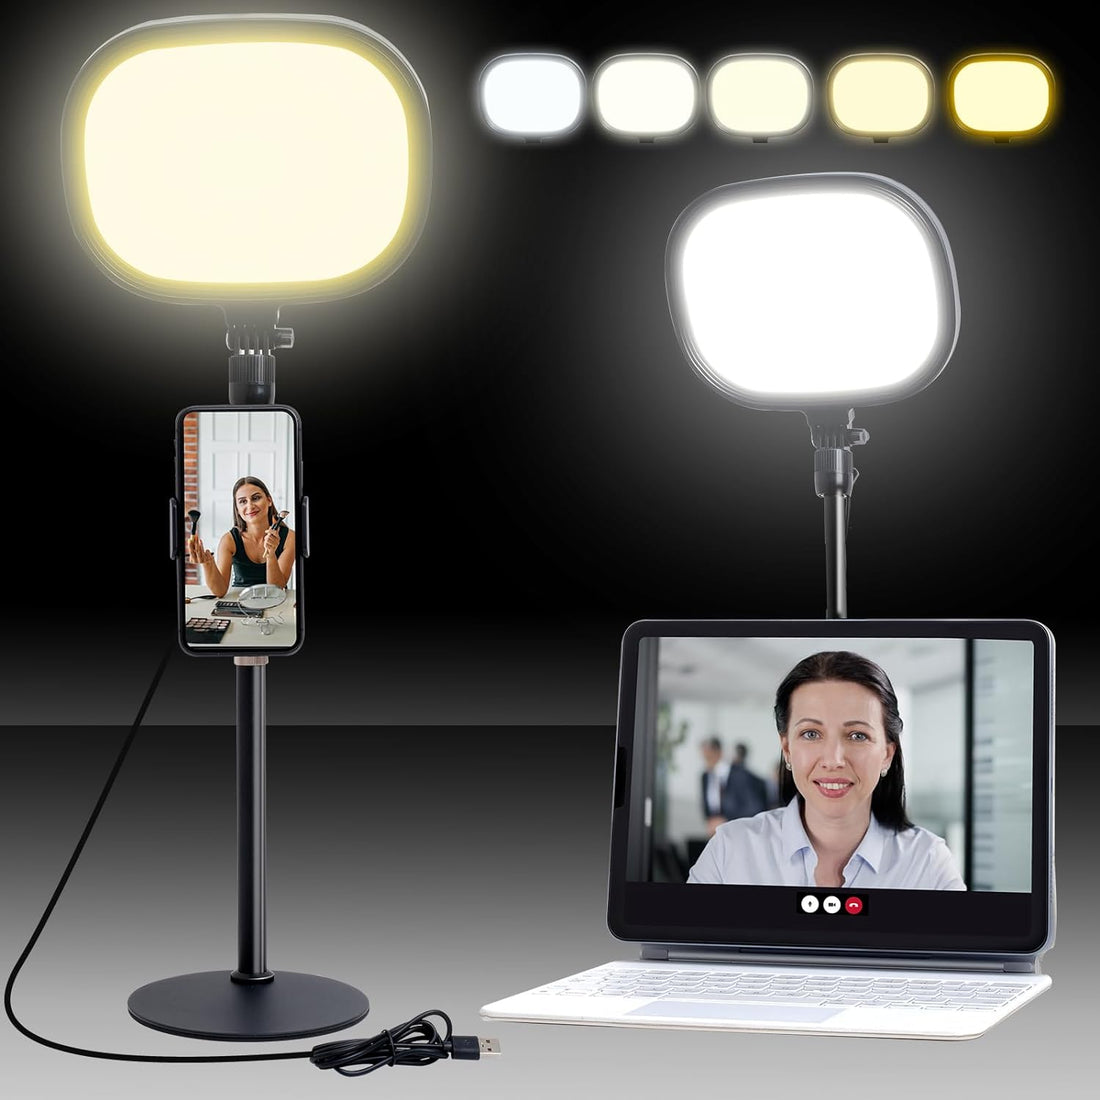 mmcrz LED Streaming Key Light Desktop Extendable Home Office Lighting Live Broadcast 360° Fill Professional Studio LED Panel Multi-Layer Diffusion, Edge-lit Technology for Game Video Makeup Photograph